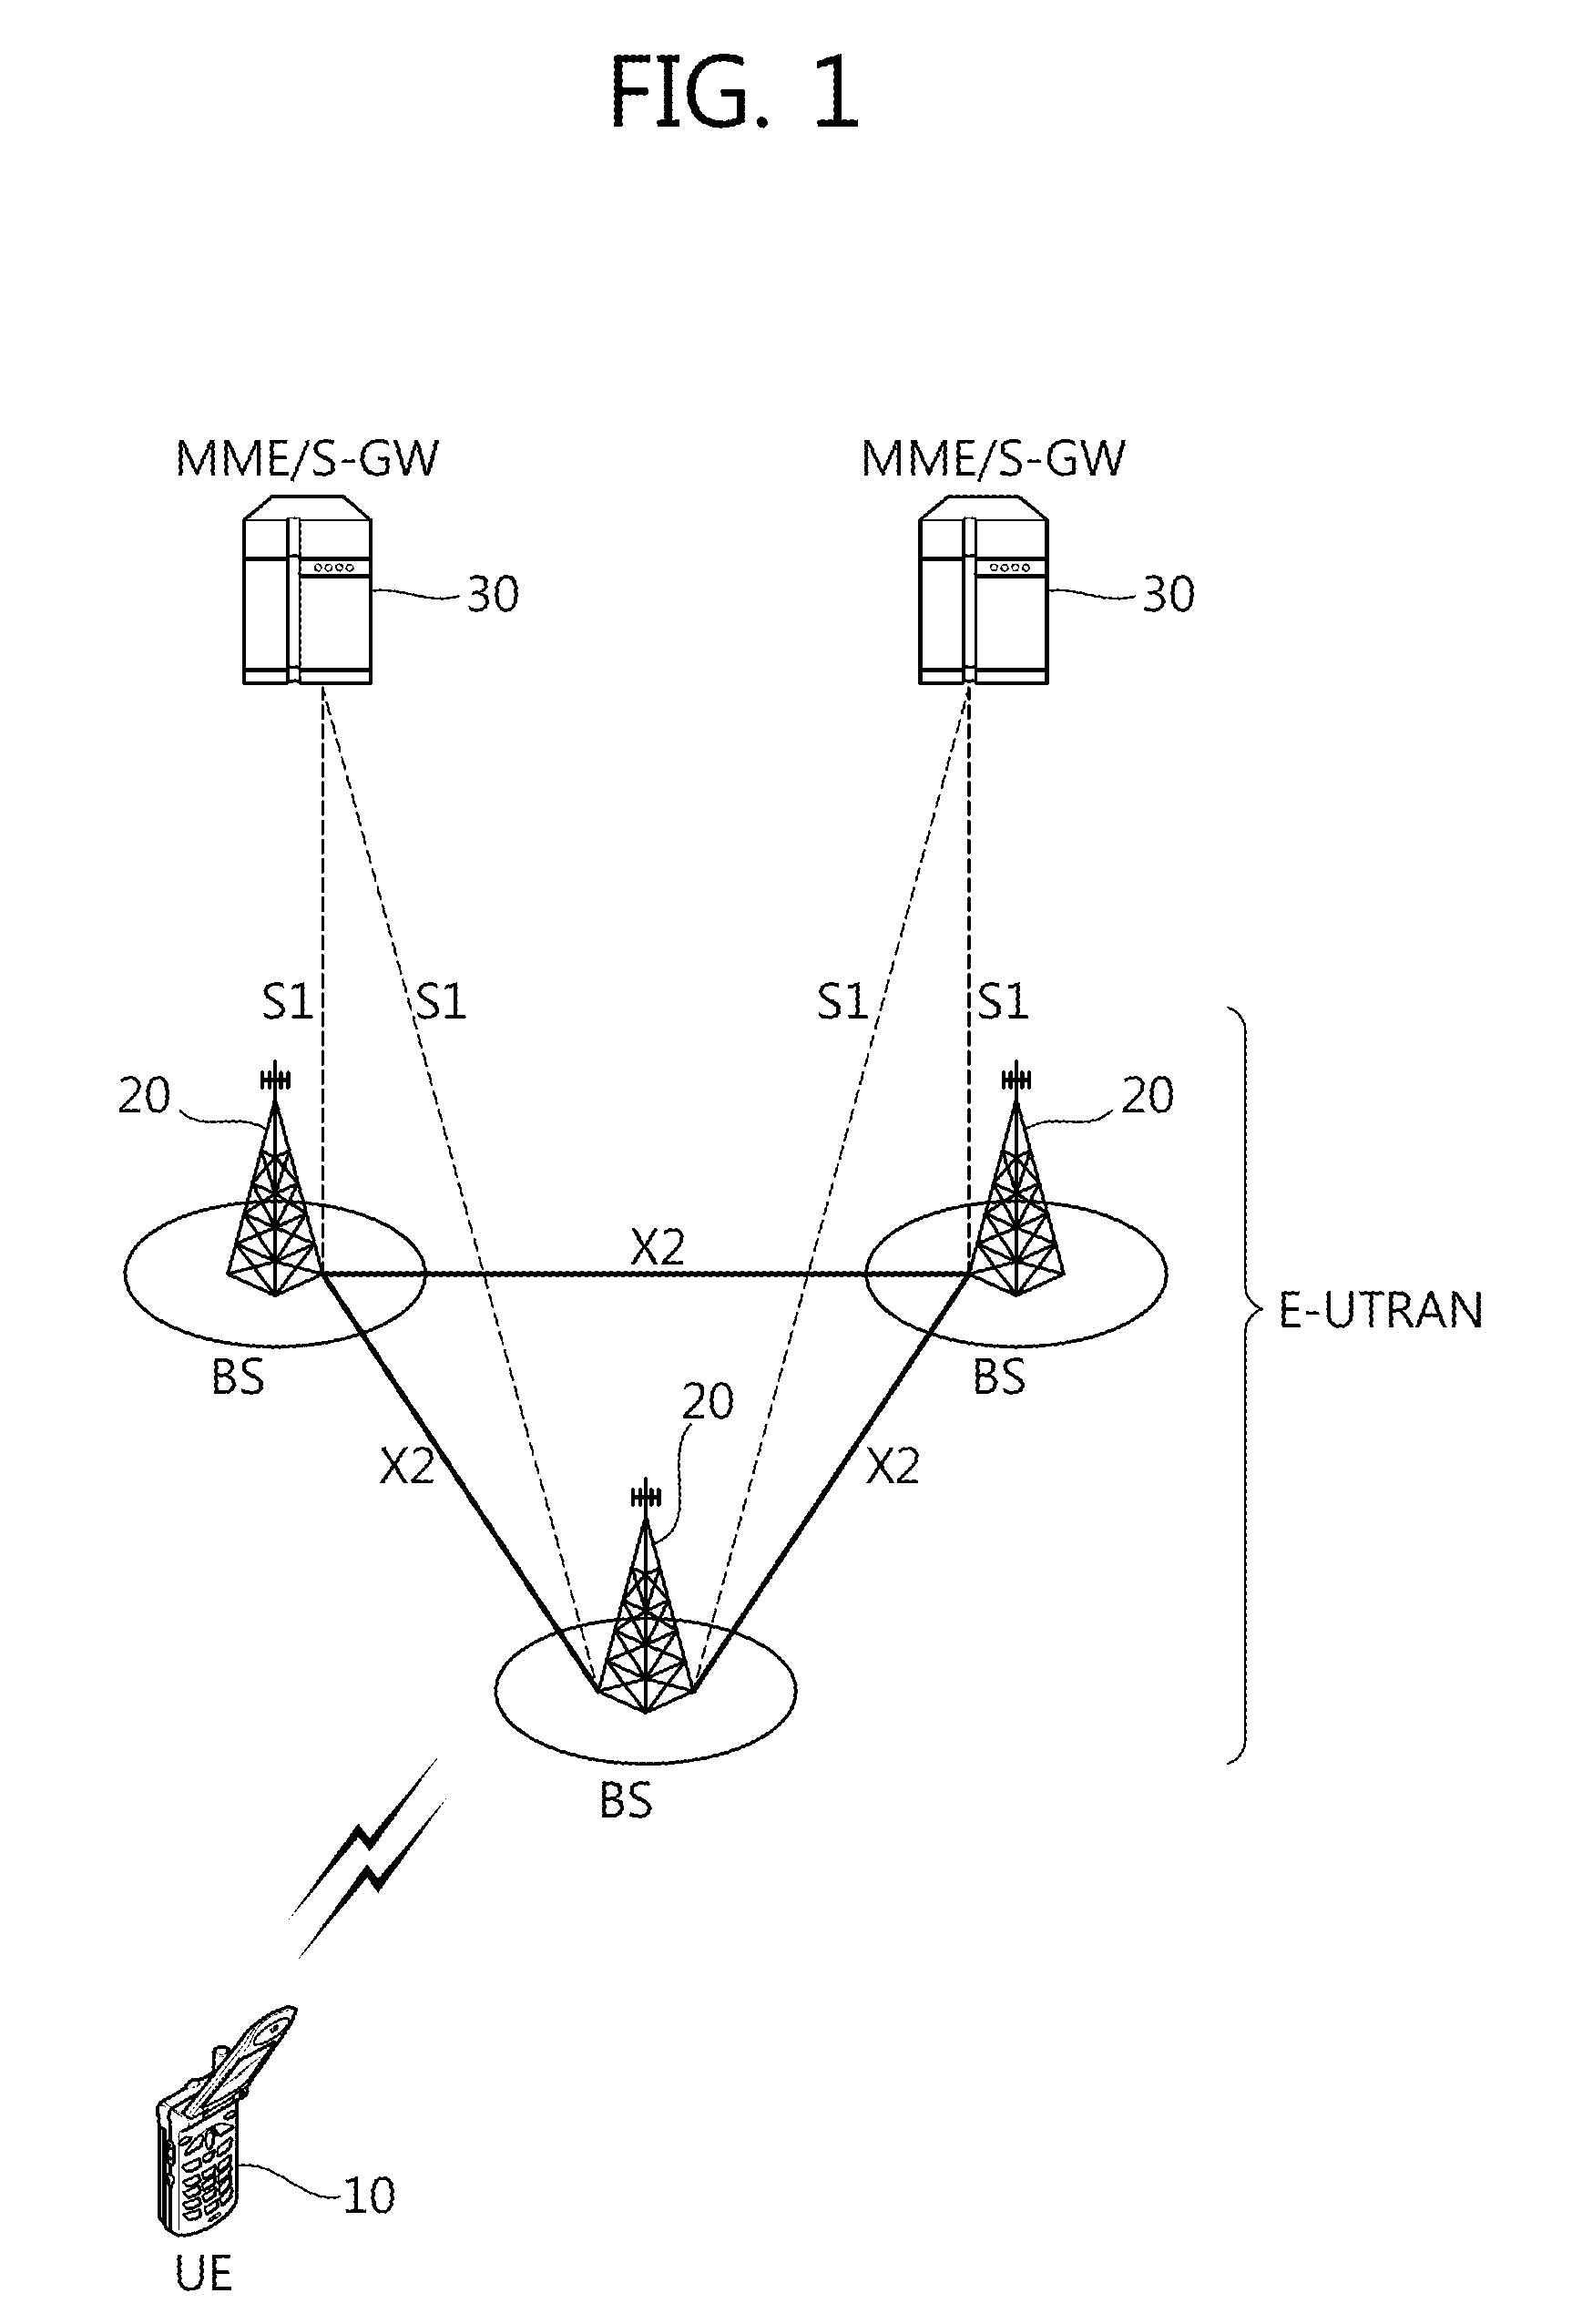 Method of transmitting control information in wireless communication system